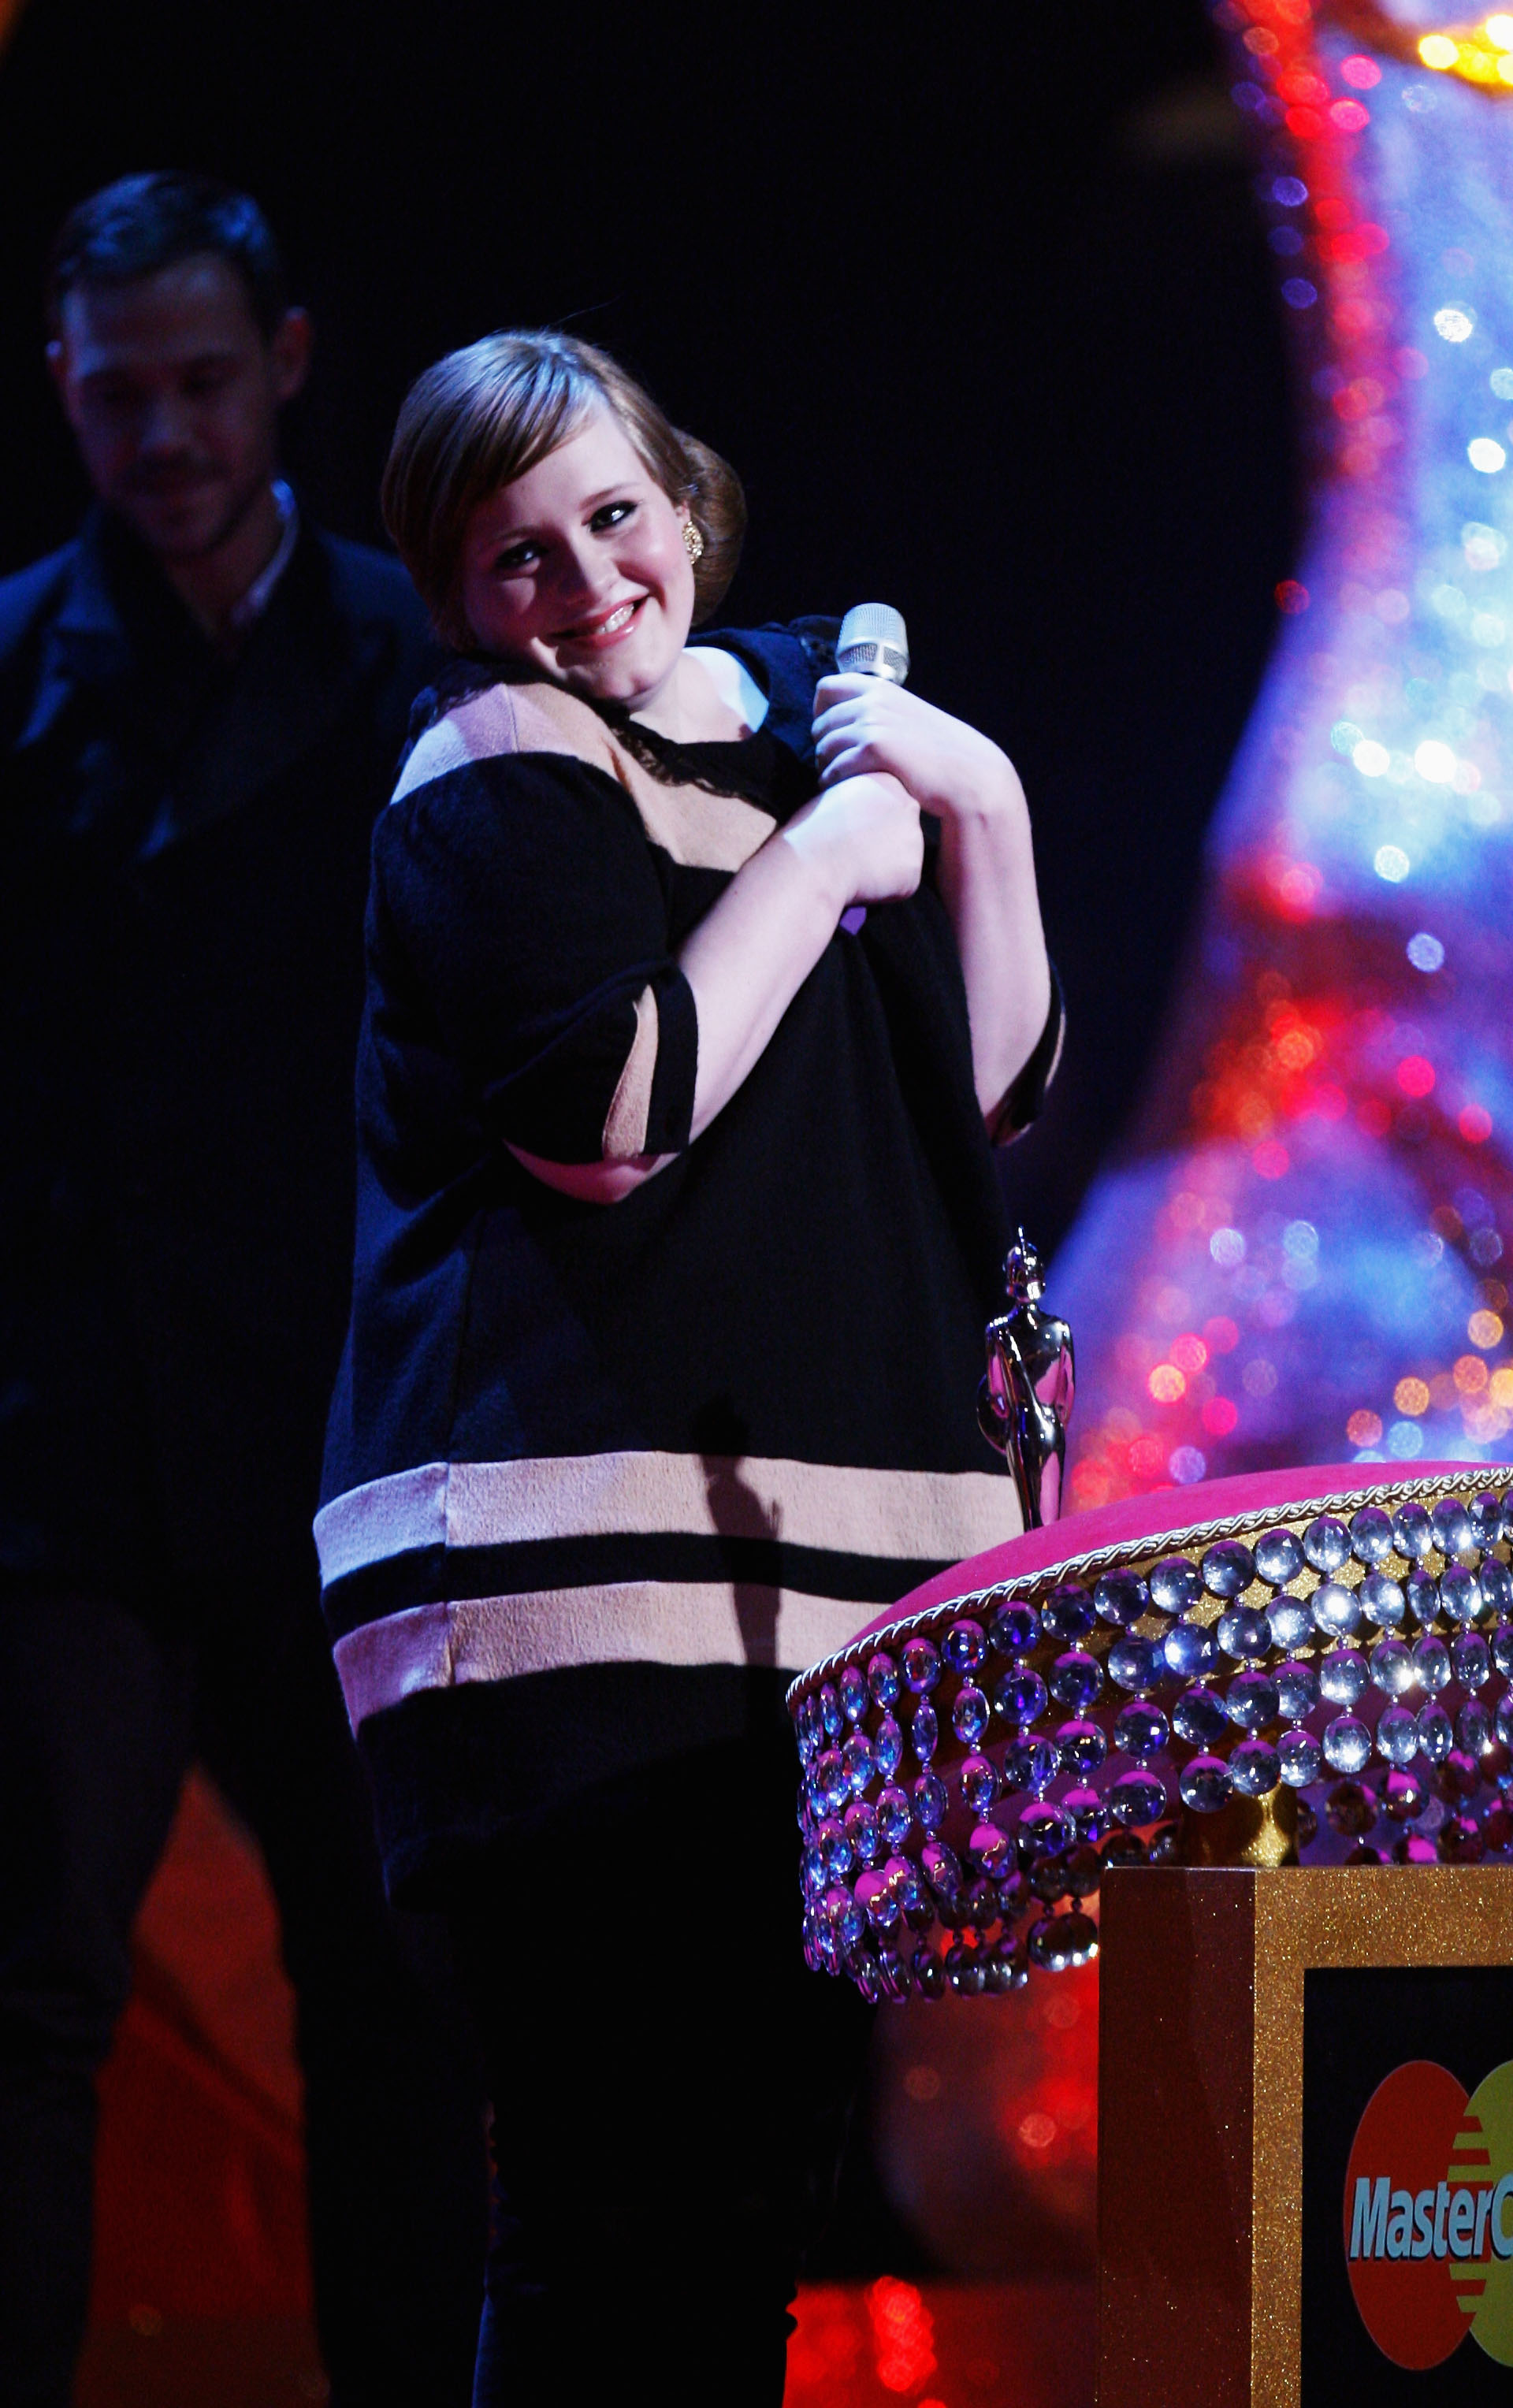 Adele receives the Critic's Choice Awards at The Brit Awards 2008 at Earls Court in London on Feb. 20, 2008 .